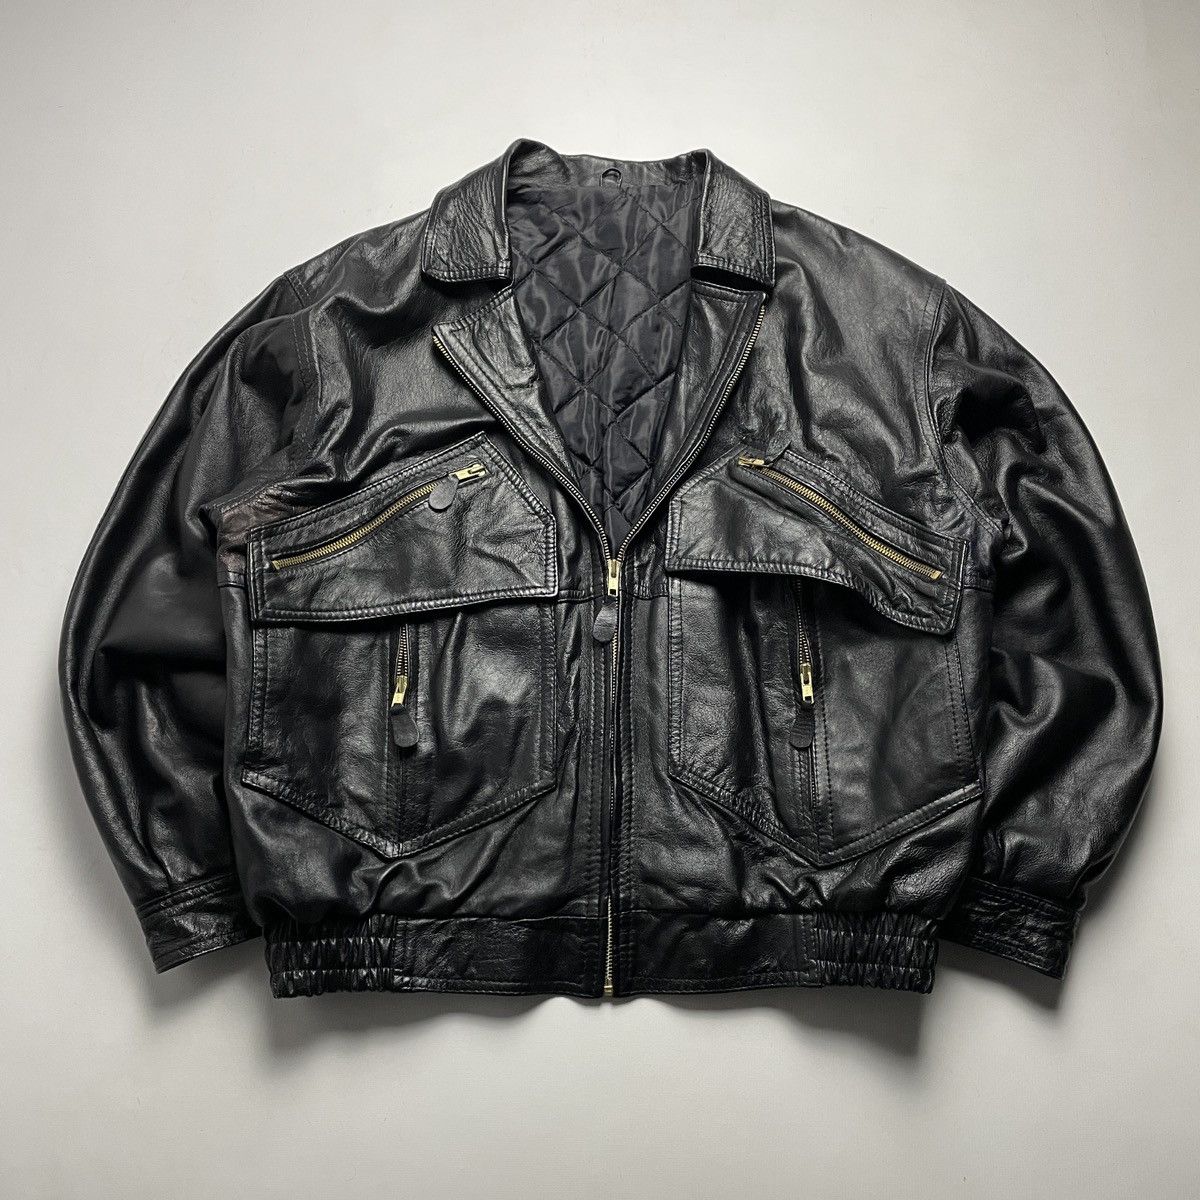 Pre-owned Bomber Jacket X Leather Jacket 1990s Type A1 Cropped Racing Avirex Style In Black